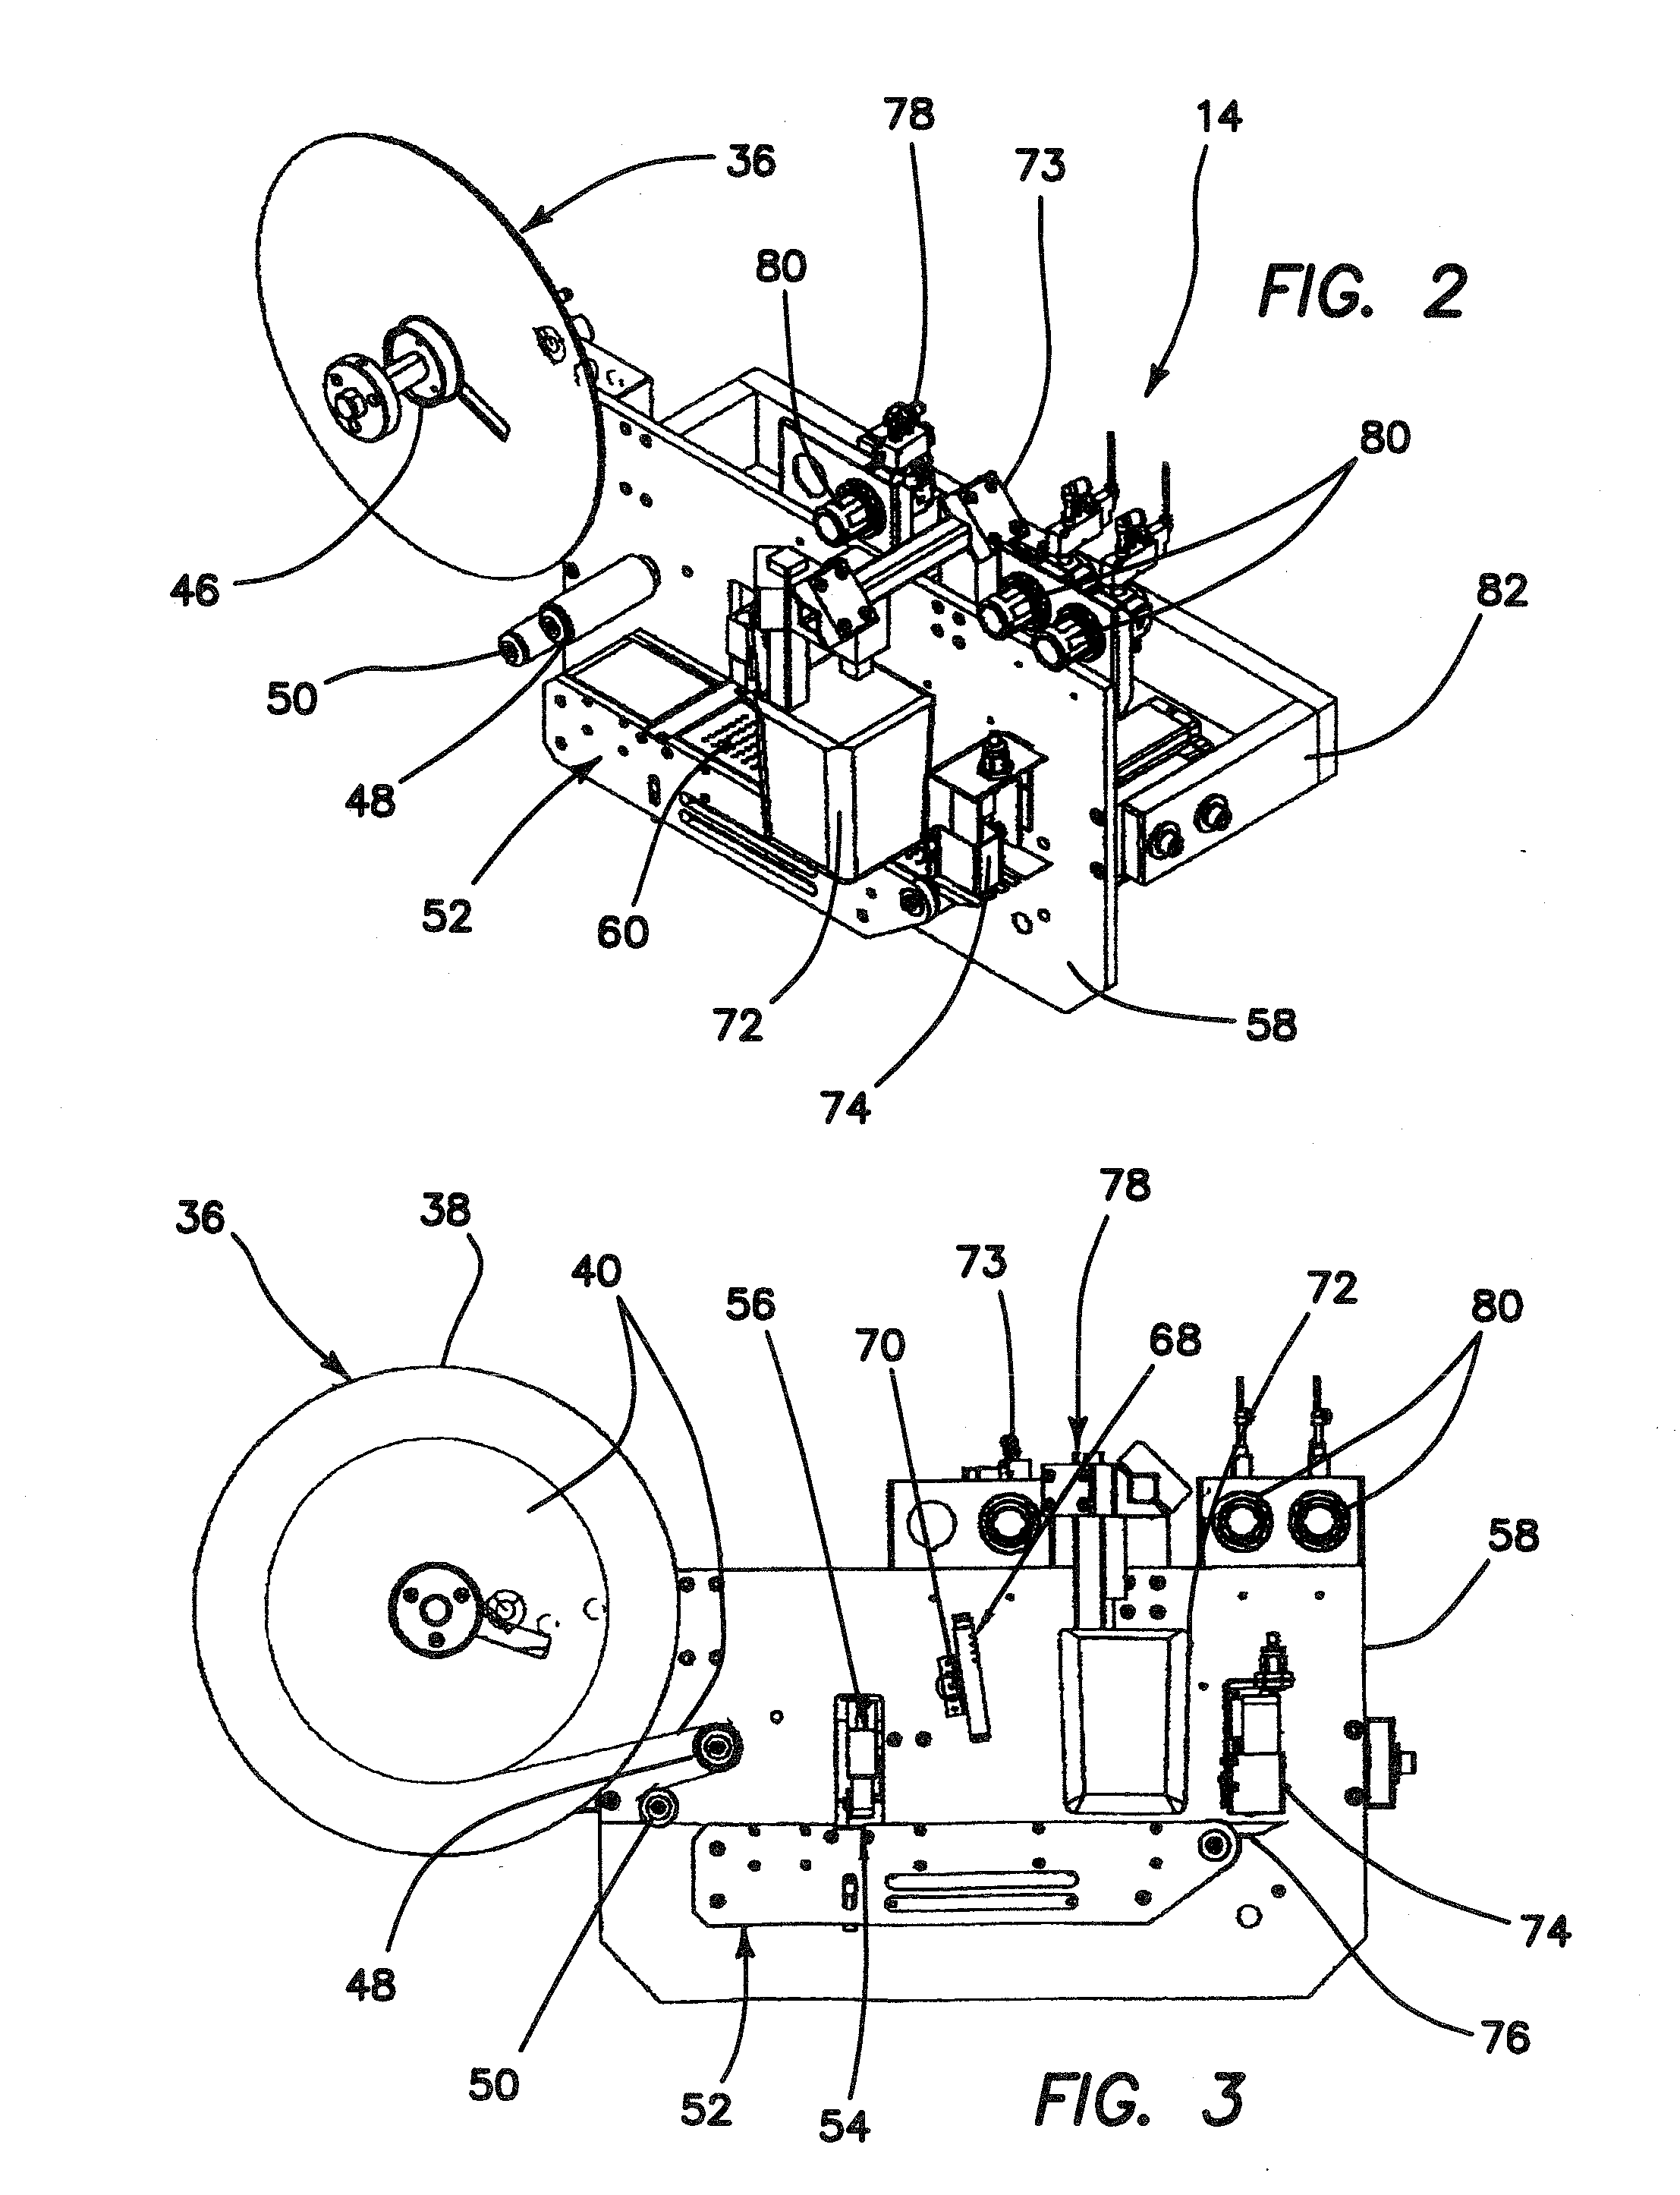 Devices and methods for applying adhesive liner-less security labels to articles